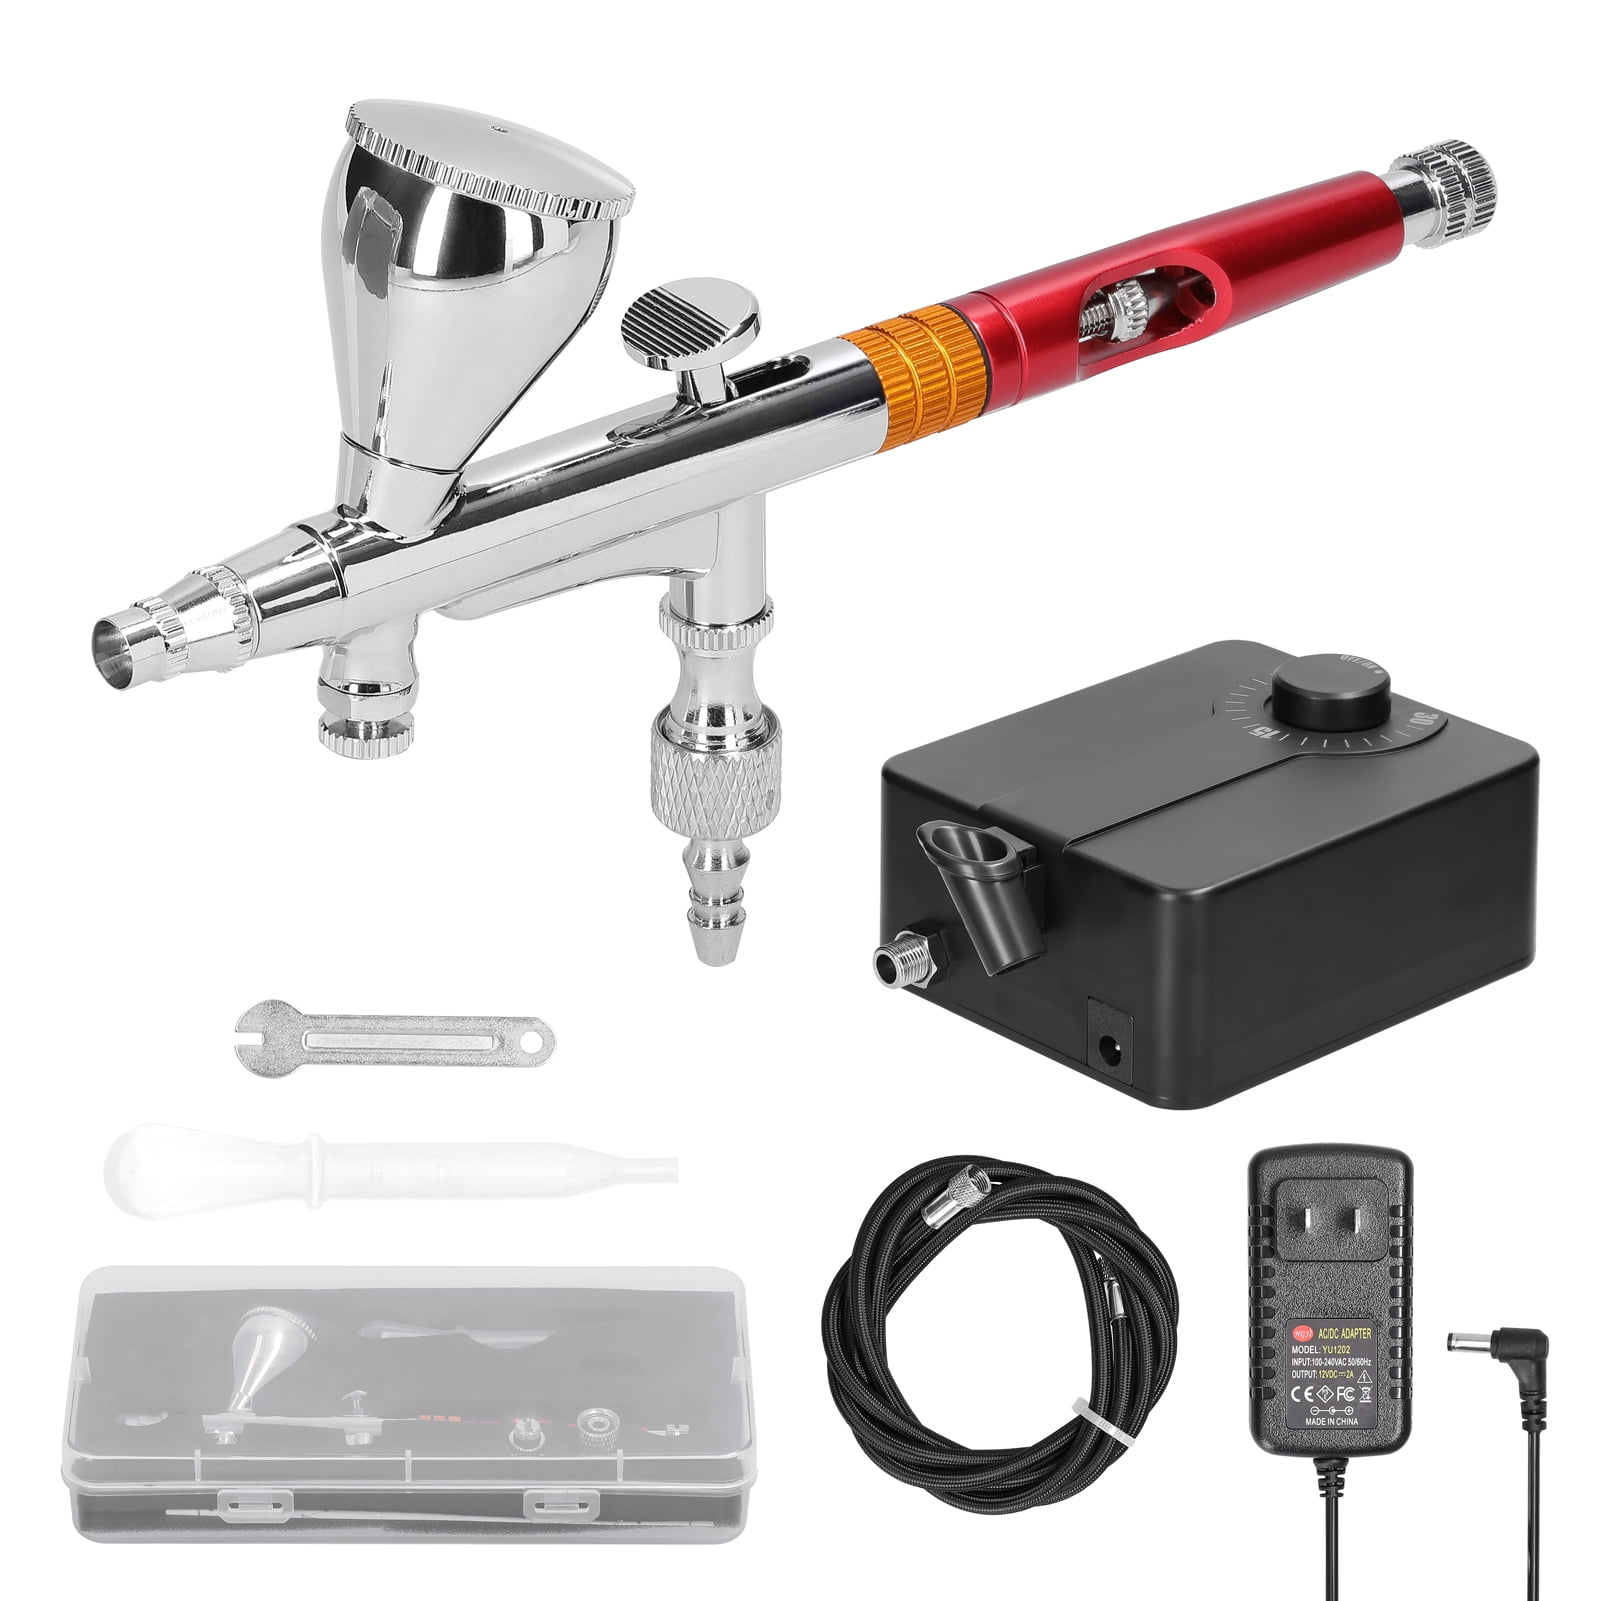 PointZero Mini Airbrush Compressor with Holder and 6 Ft. Hose